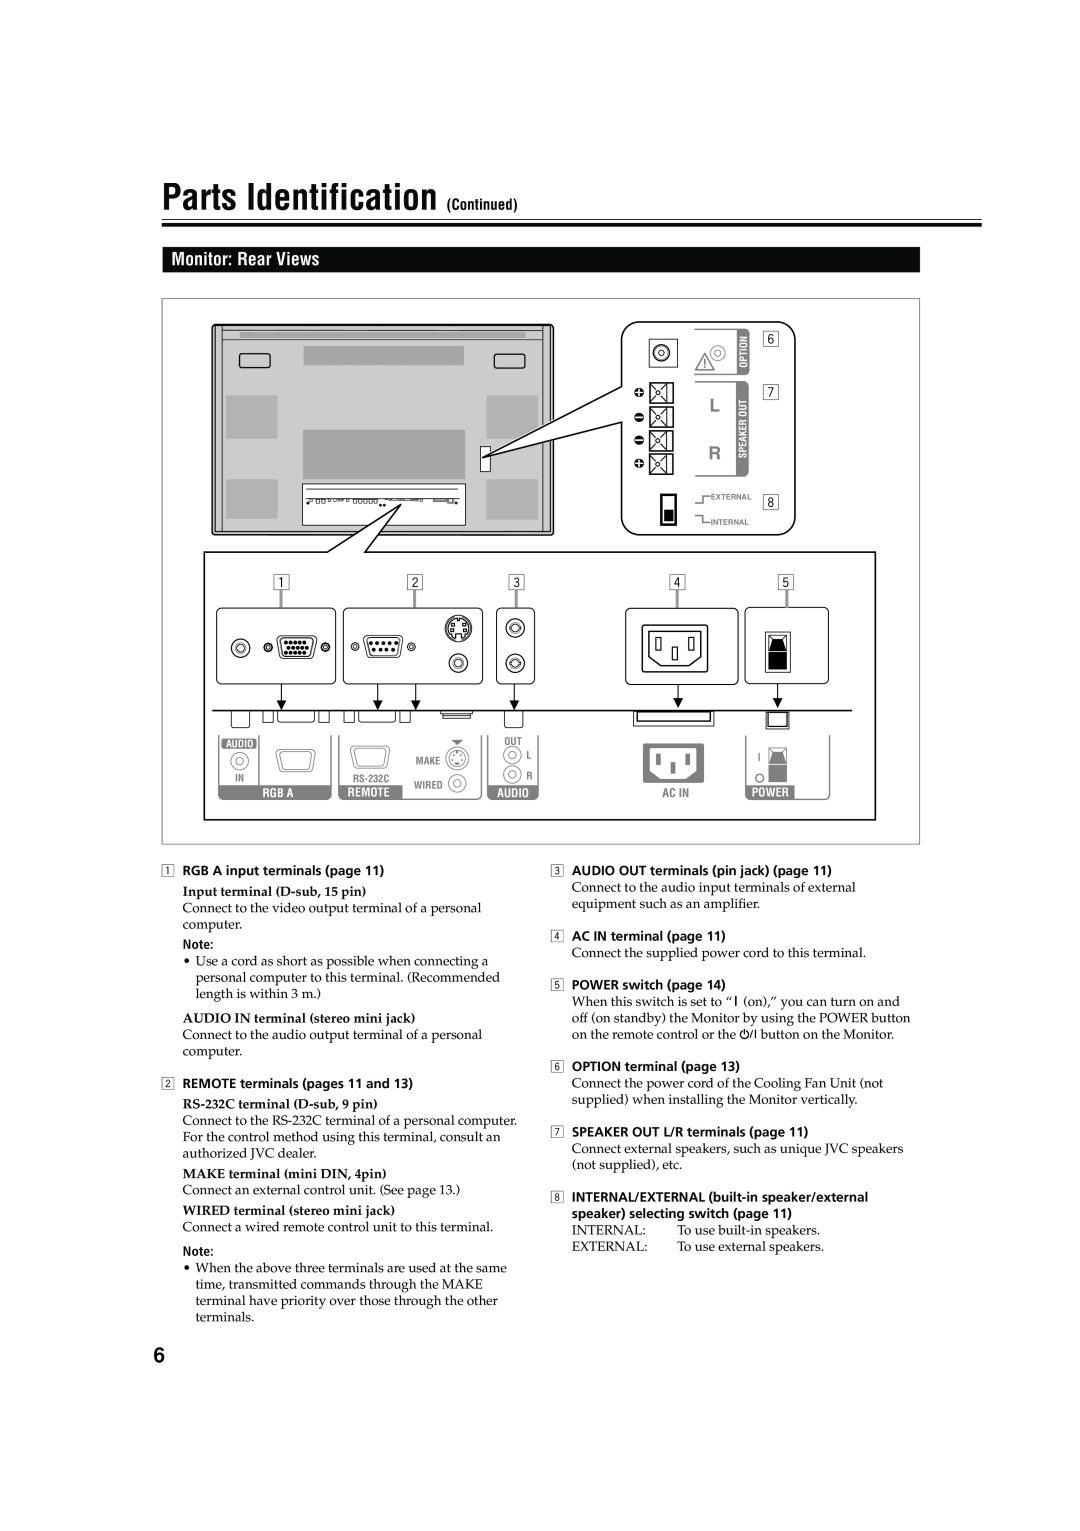 JVC GM-V42C Parts Identification Continued, Monitor Rear Views, RGB A input terminals page, REMOTE terminals pages 11 and 